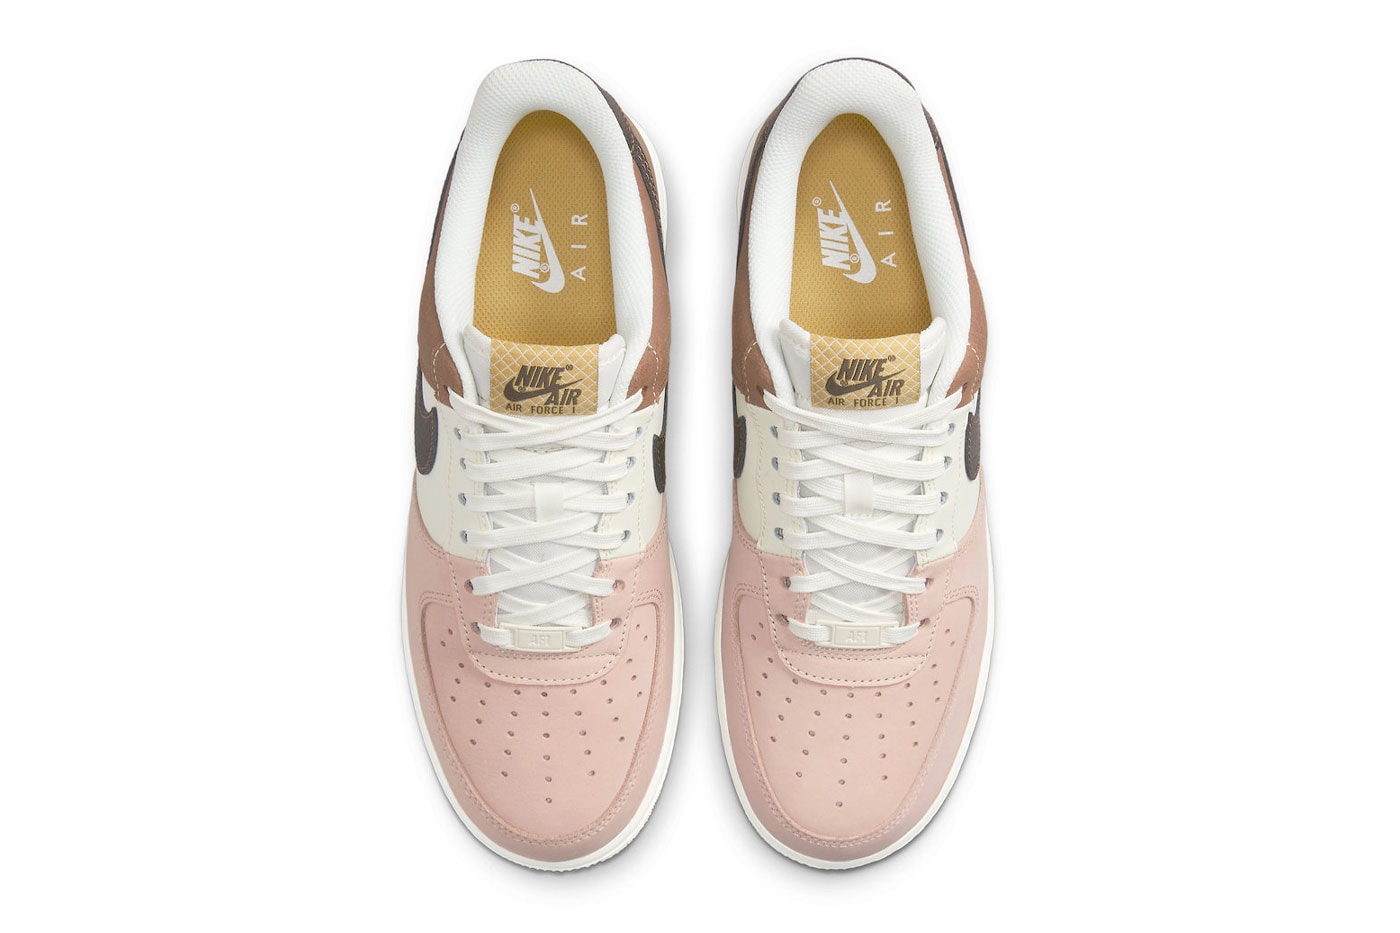 Nike Air Force 1 Low "Neopolitan" Takes Summer Treats to a Whole New Level ice cream chocolate vanilla strawberry summer-ready shoes